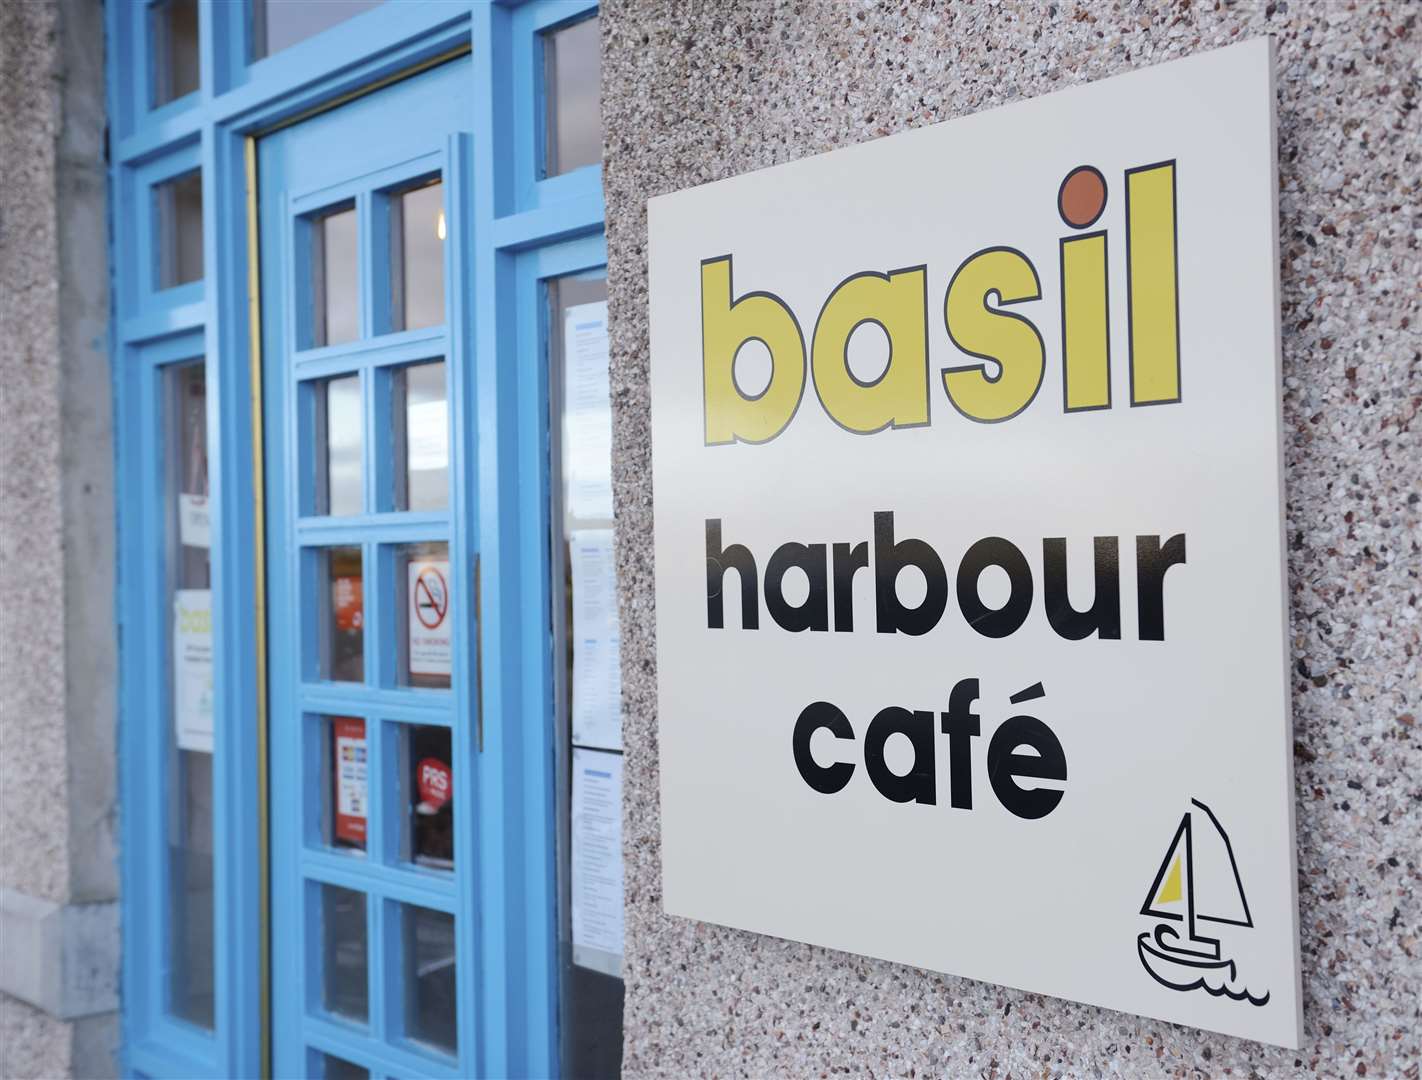 Basil Harbour Cafe does a mean fish finger sandwich, among other treats.